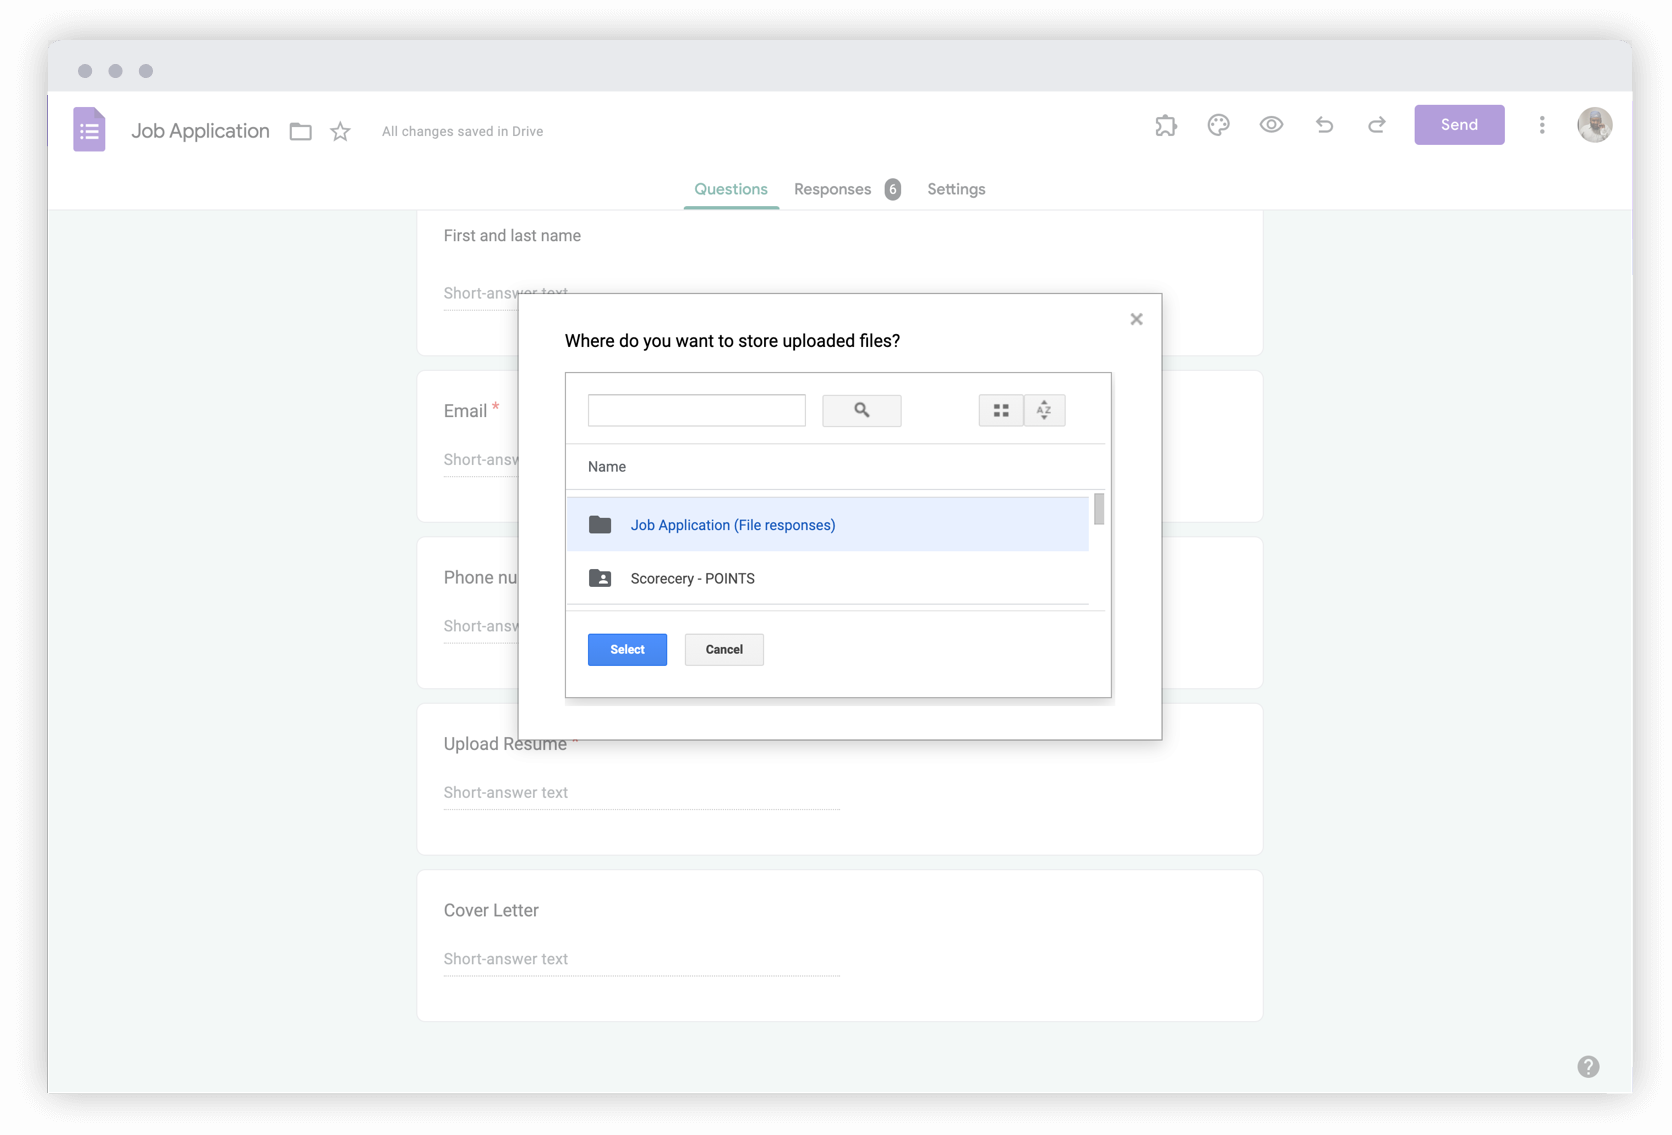 Automatically sync uploaded files to Google Drive on form submission